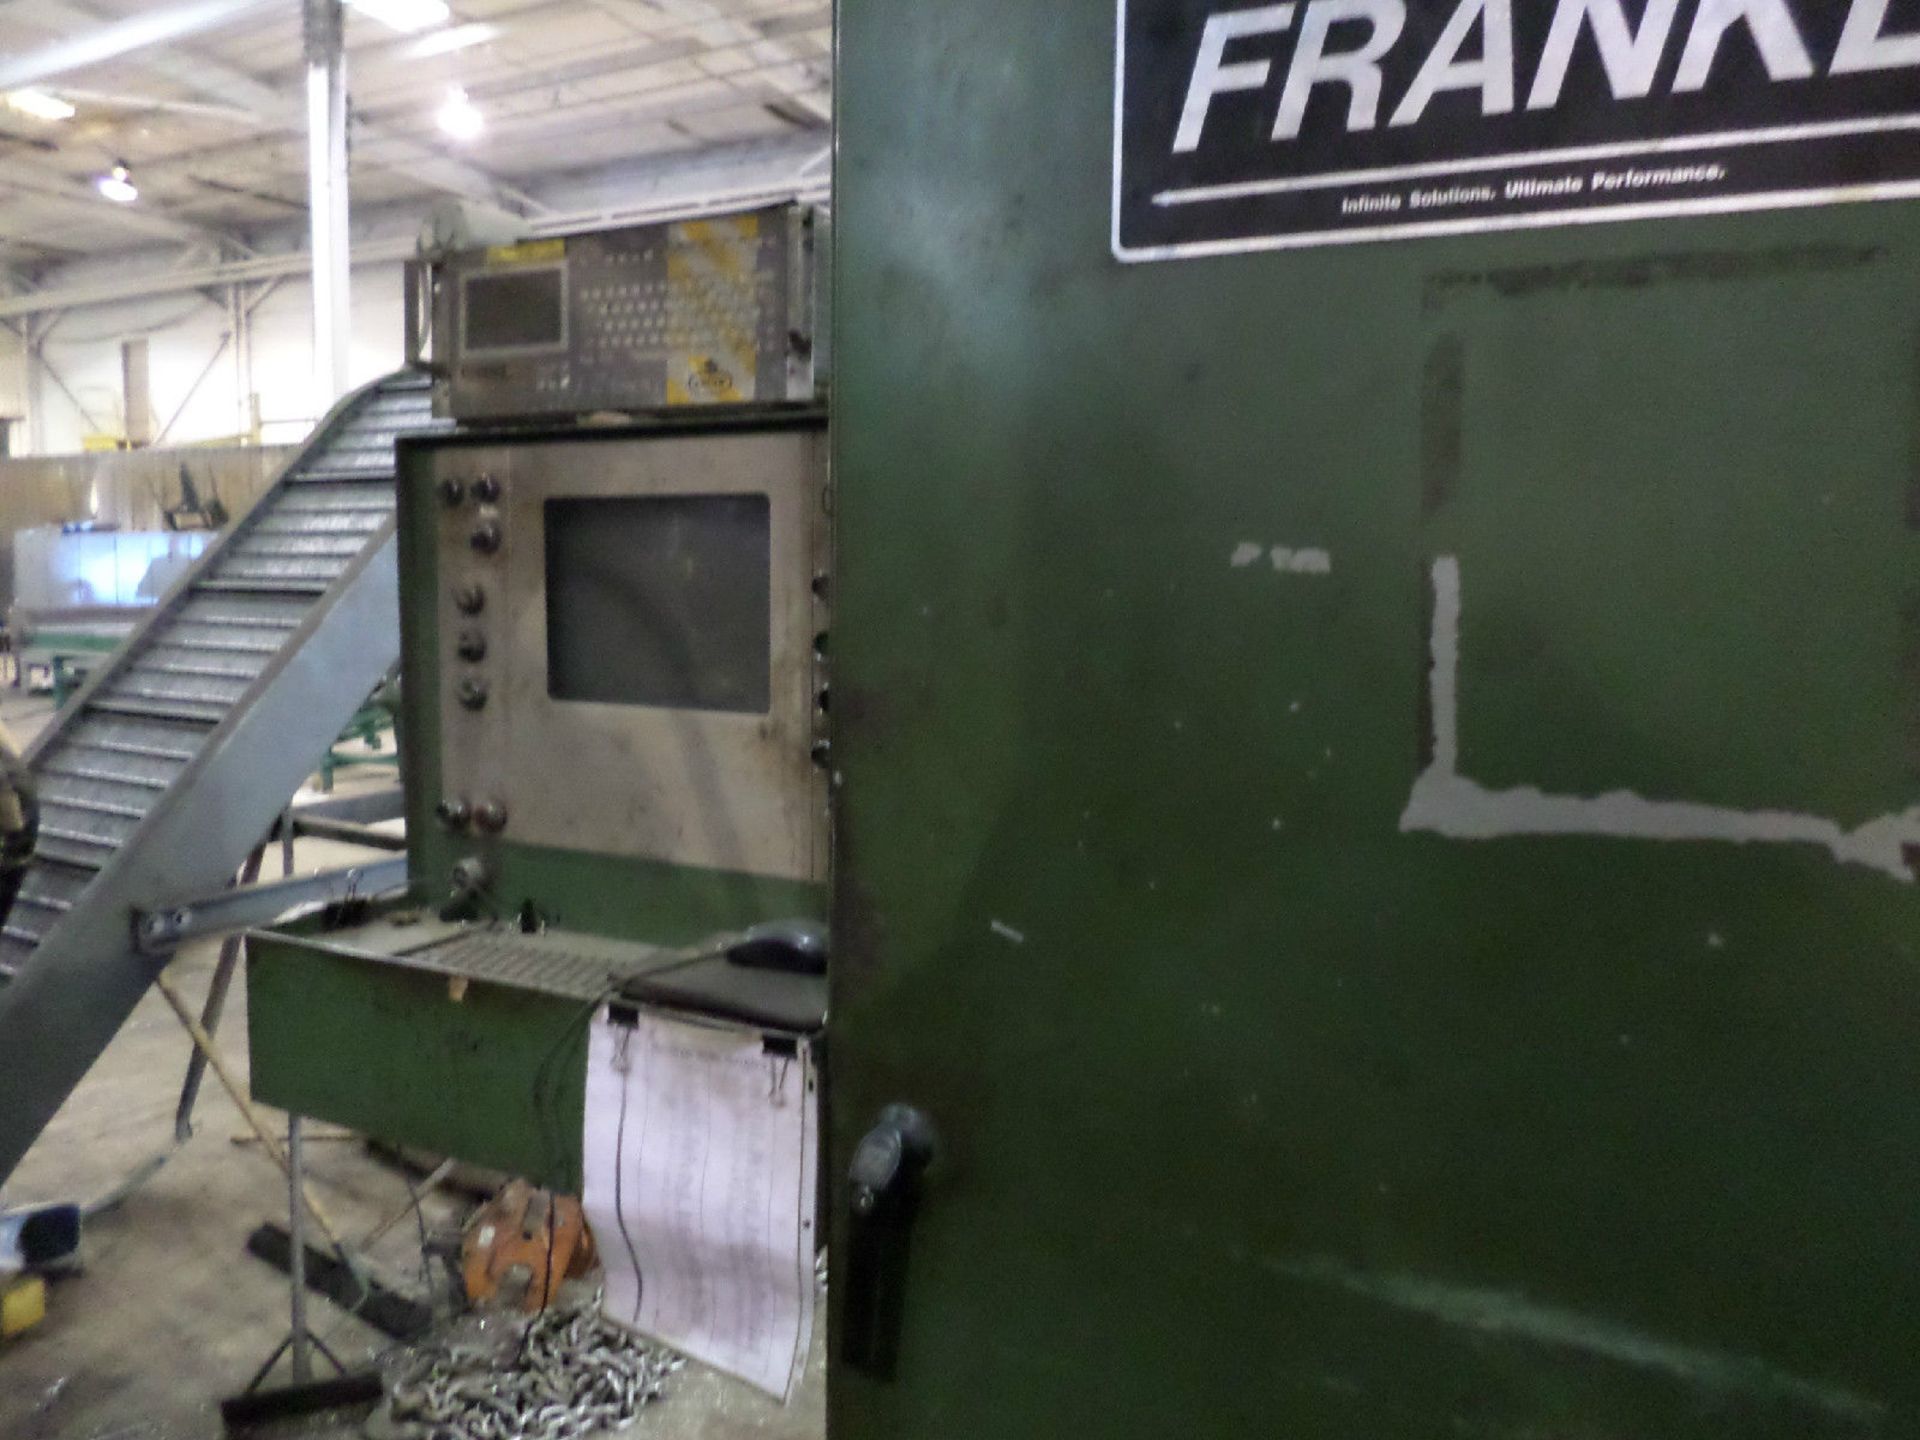 2003 FRANKLIN CNC DRILL LINE, MODEL:HD145, 3 SPINDLE - Image 7 of 7